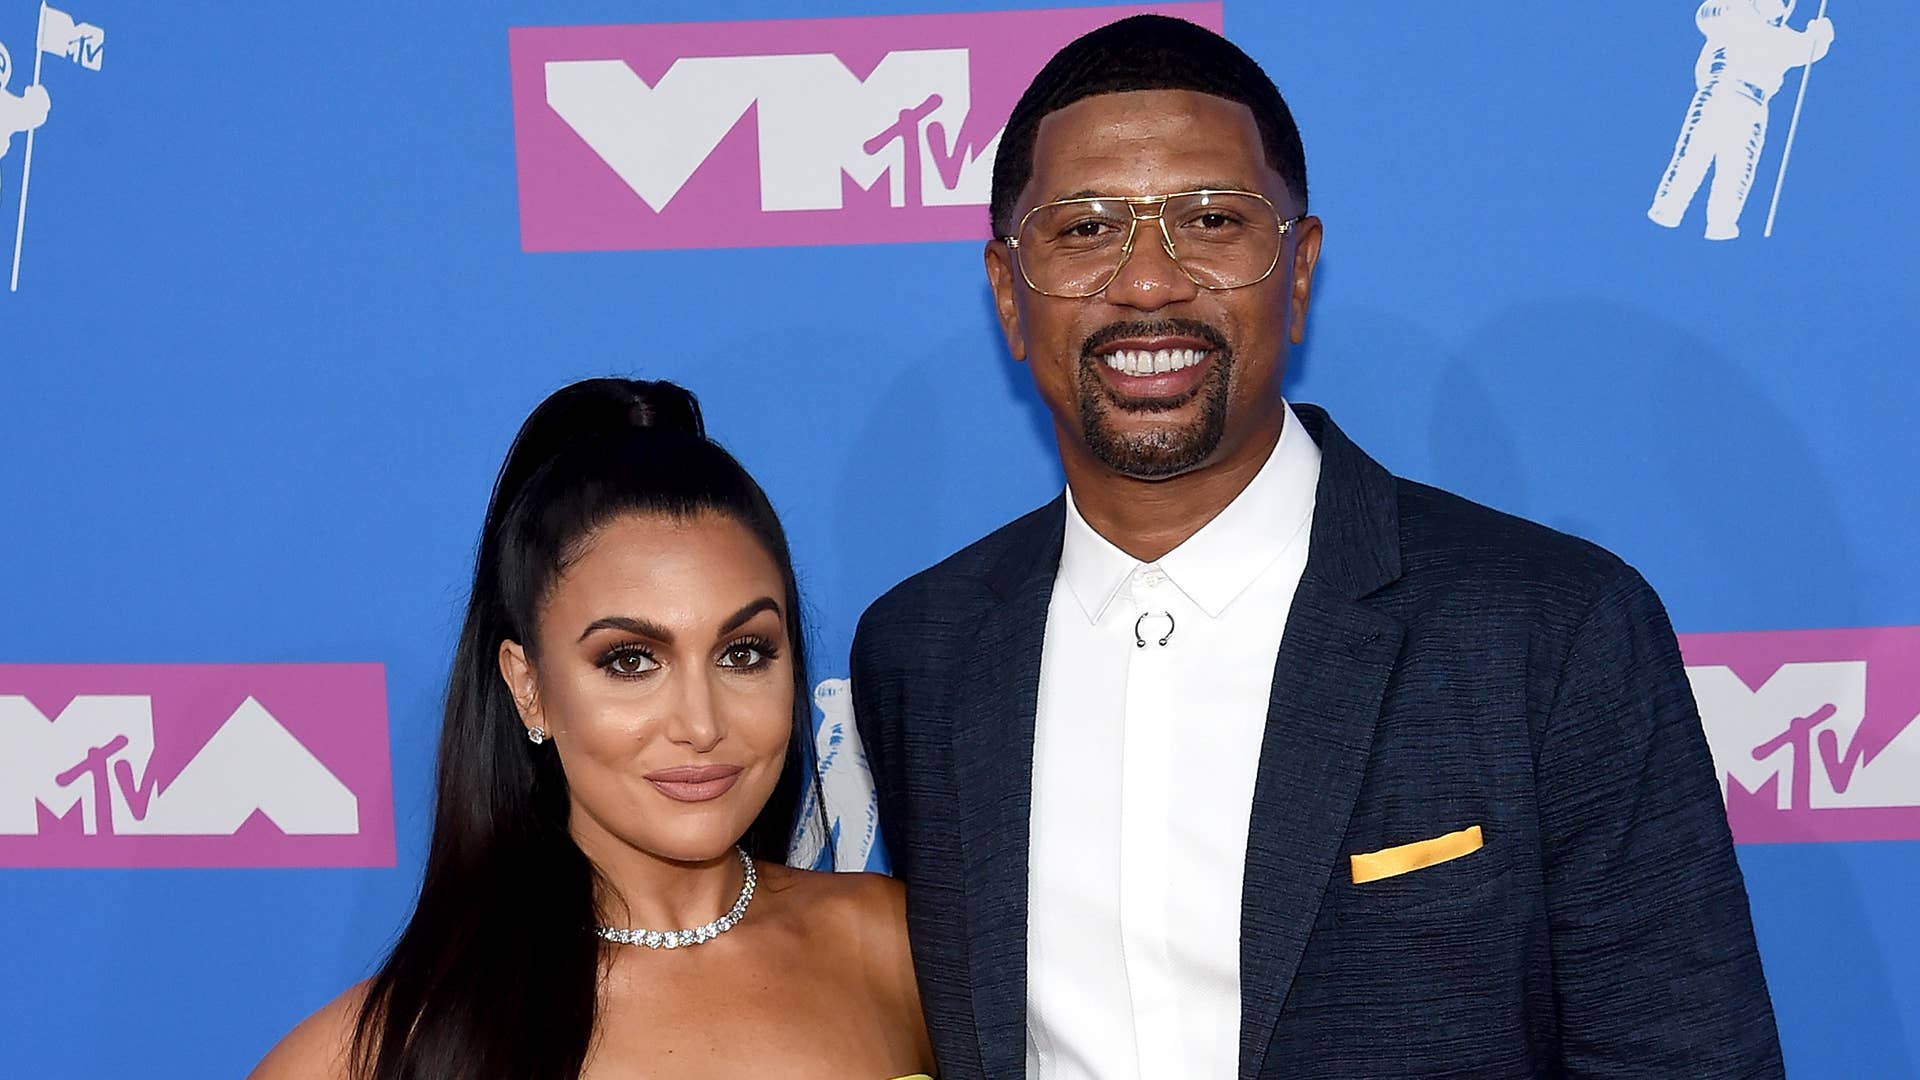 Molly Qerim and Jalen Rose attend the 2018 MTV Video Music Awards